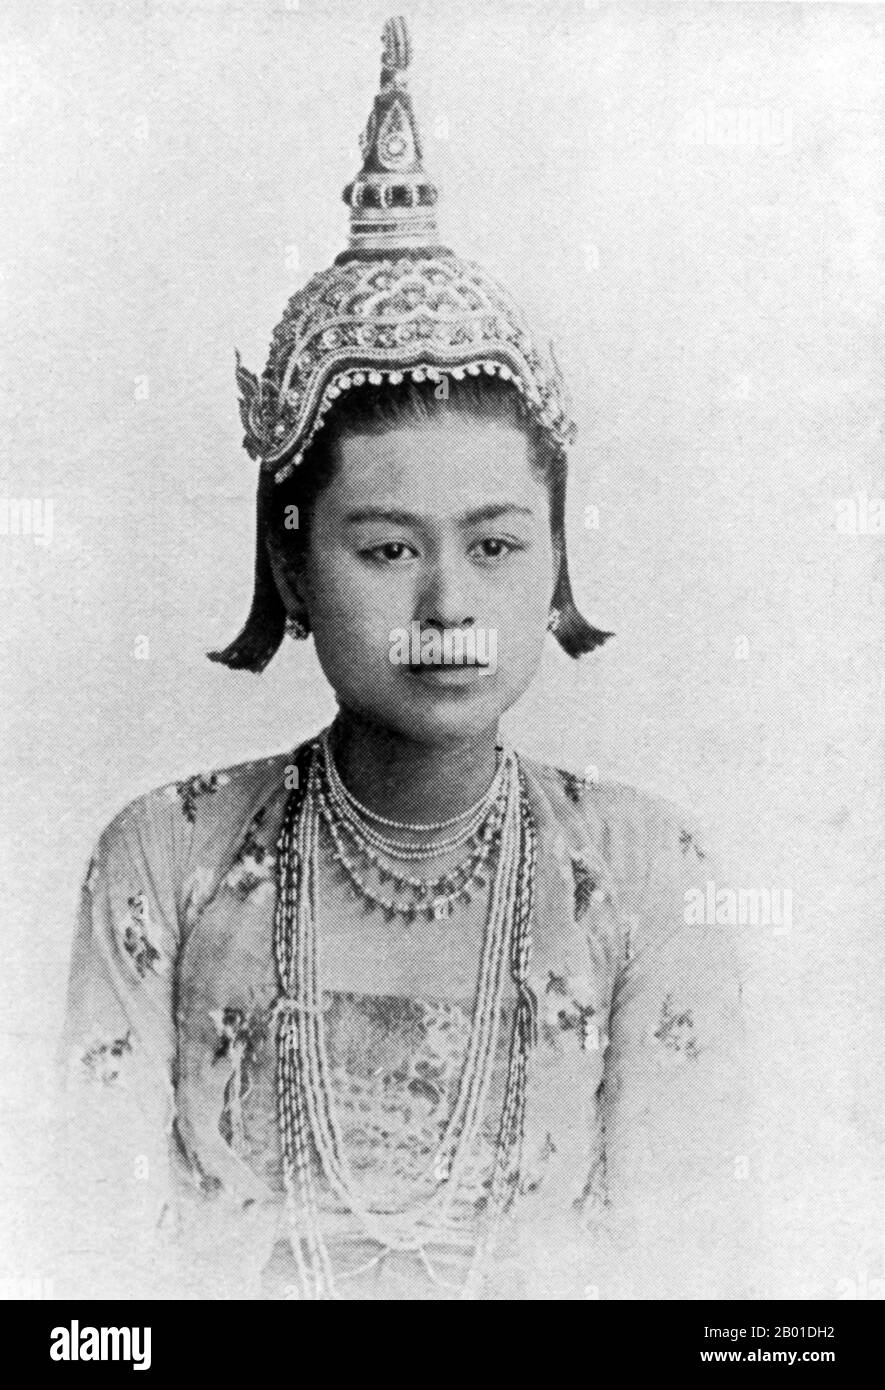 Burma: A Burman princess. Photo by Max Henry Ferrars (28 October 1846 - 7 February 1933) c. 1900.  The British conquest of Burma began in 1824 in response to a Burmese attempt to invade India. By 1886, and after two further wars, Britain had incorporated the entire country into the British Raj. To stimulate trade and facilitate changes, the British brought in Indians and Chinese, who quickly displaced the Burmese in urban areas. To this day Rangoon and Mandalay have large ethnic Indian populations. Railways and schools were built, as well as a large number of prisons. Stock Photo